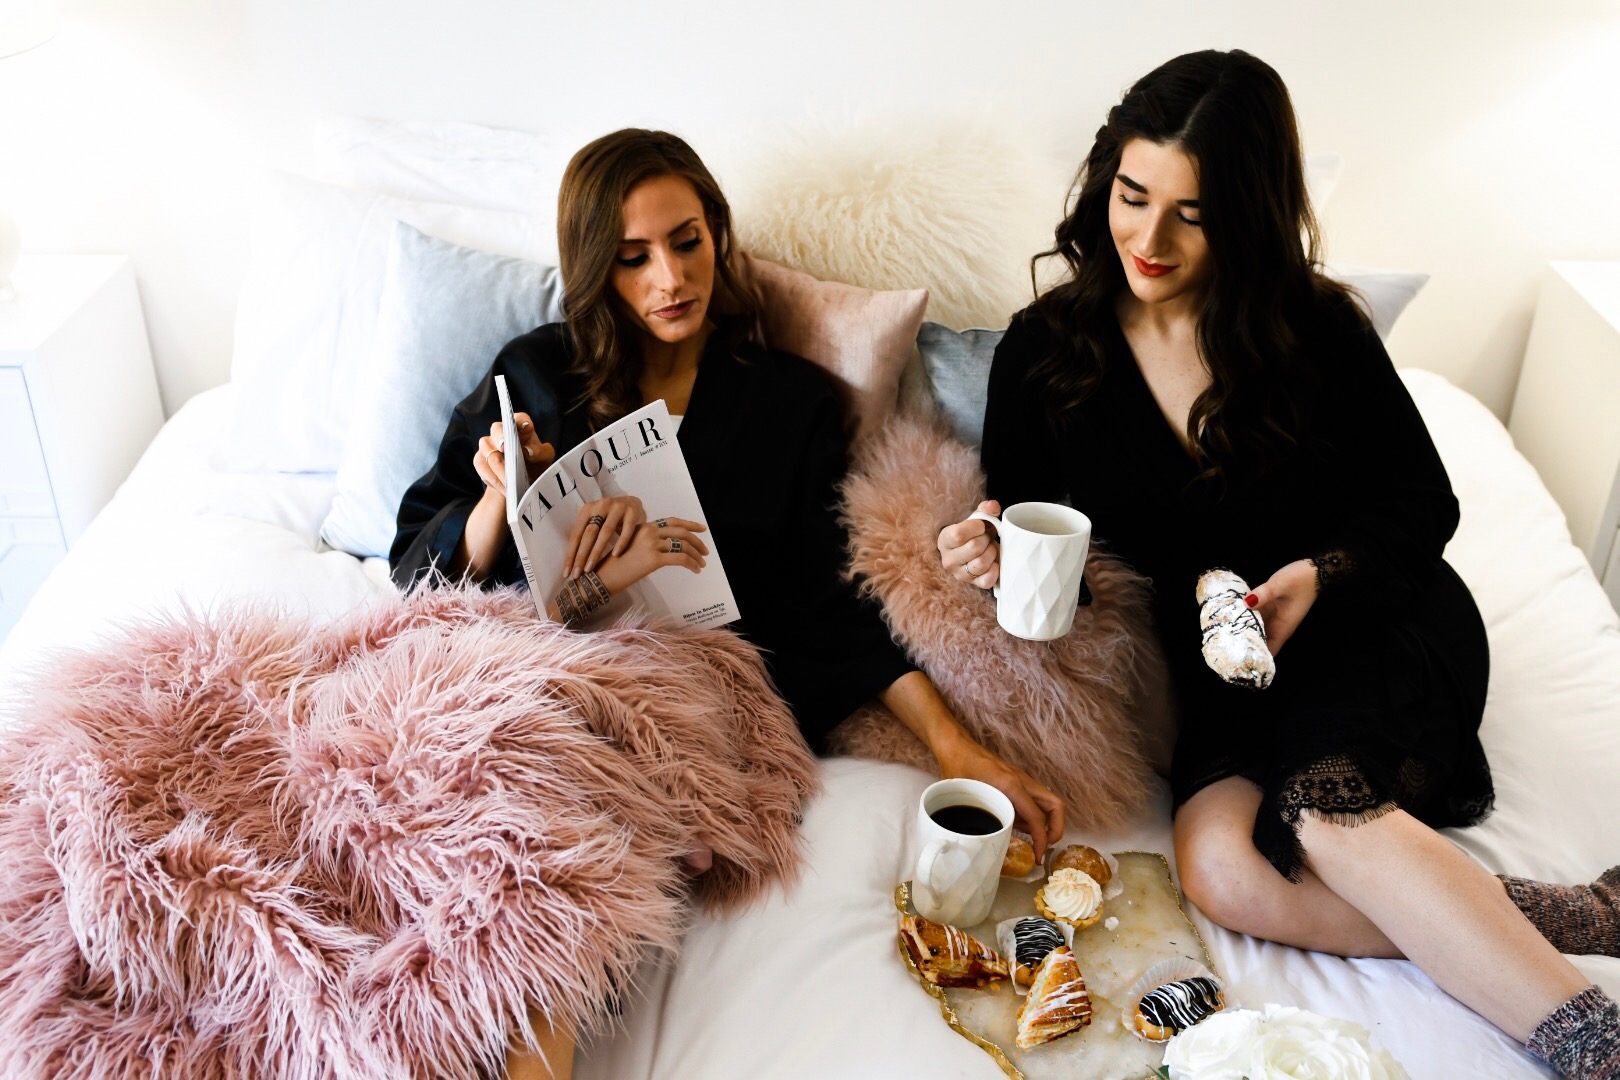 Girls' Night In With Valour Magazine Esther Santer Fashion Blog NYC Street Style Blogger Outfit OOTD Trendy Eishes Style Cozy Blanket Throw Pillows Flowers Desserts Pastries Black Robes Pink Fur Fuzzy Slippers  Jcrew Adore Me Socks Mugs Coffee Women.jpg